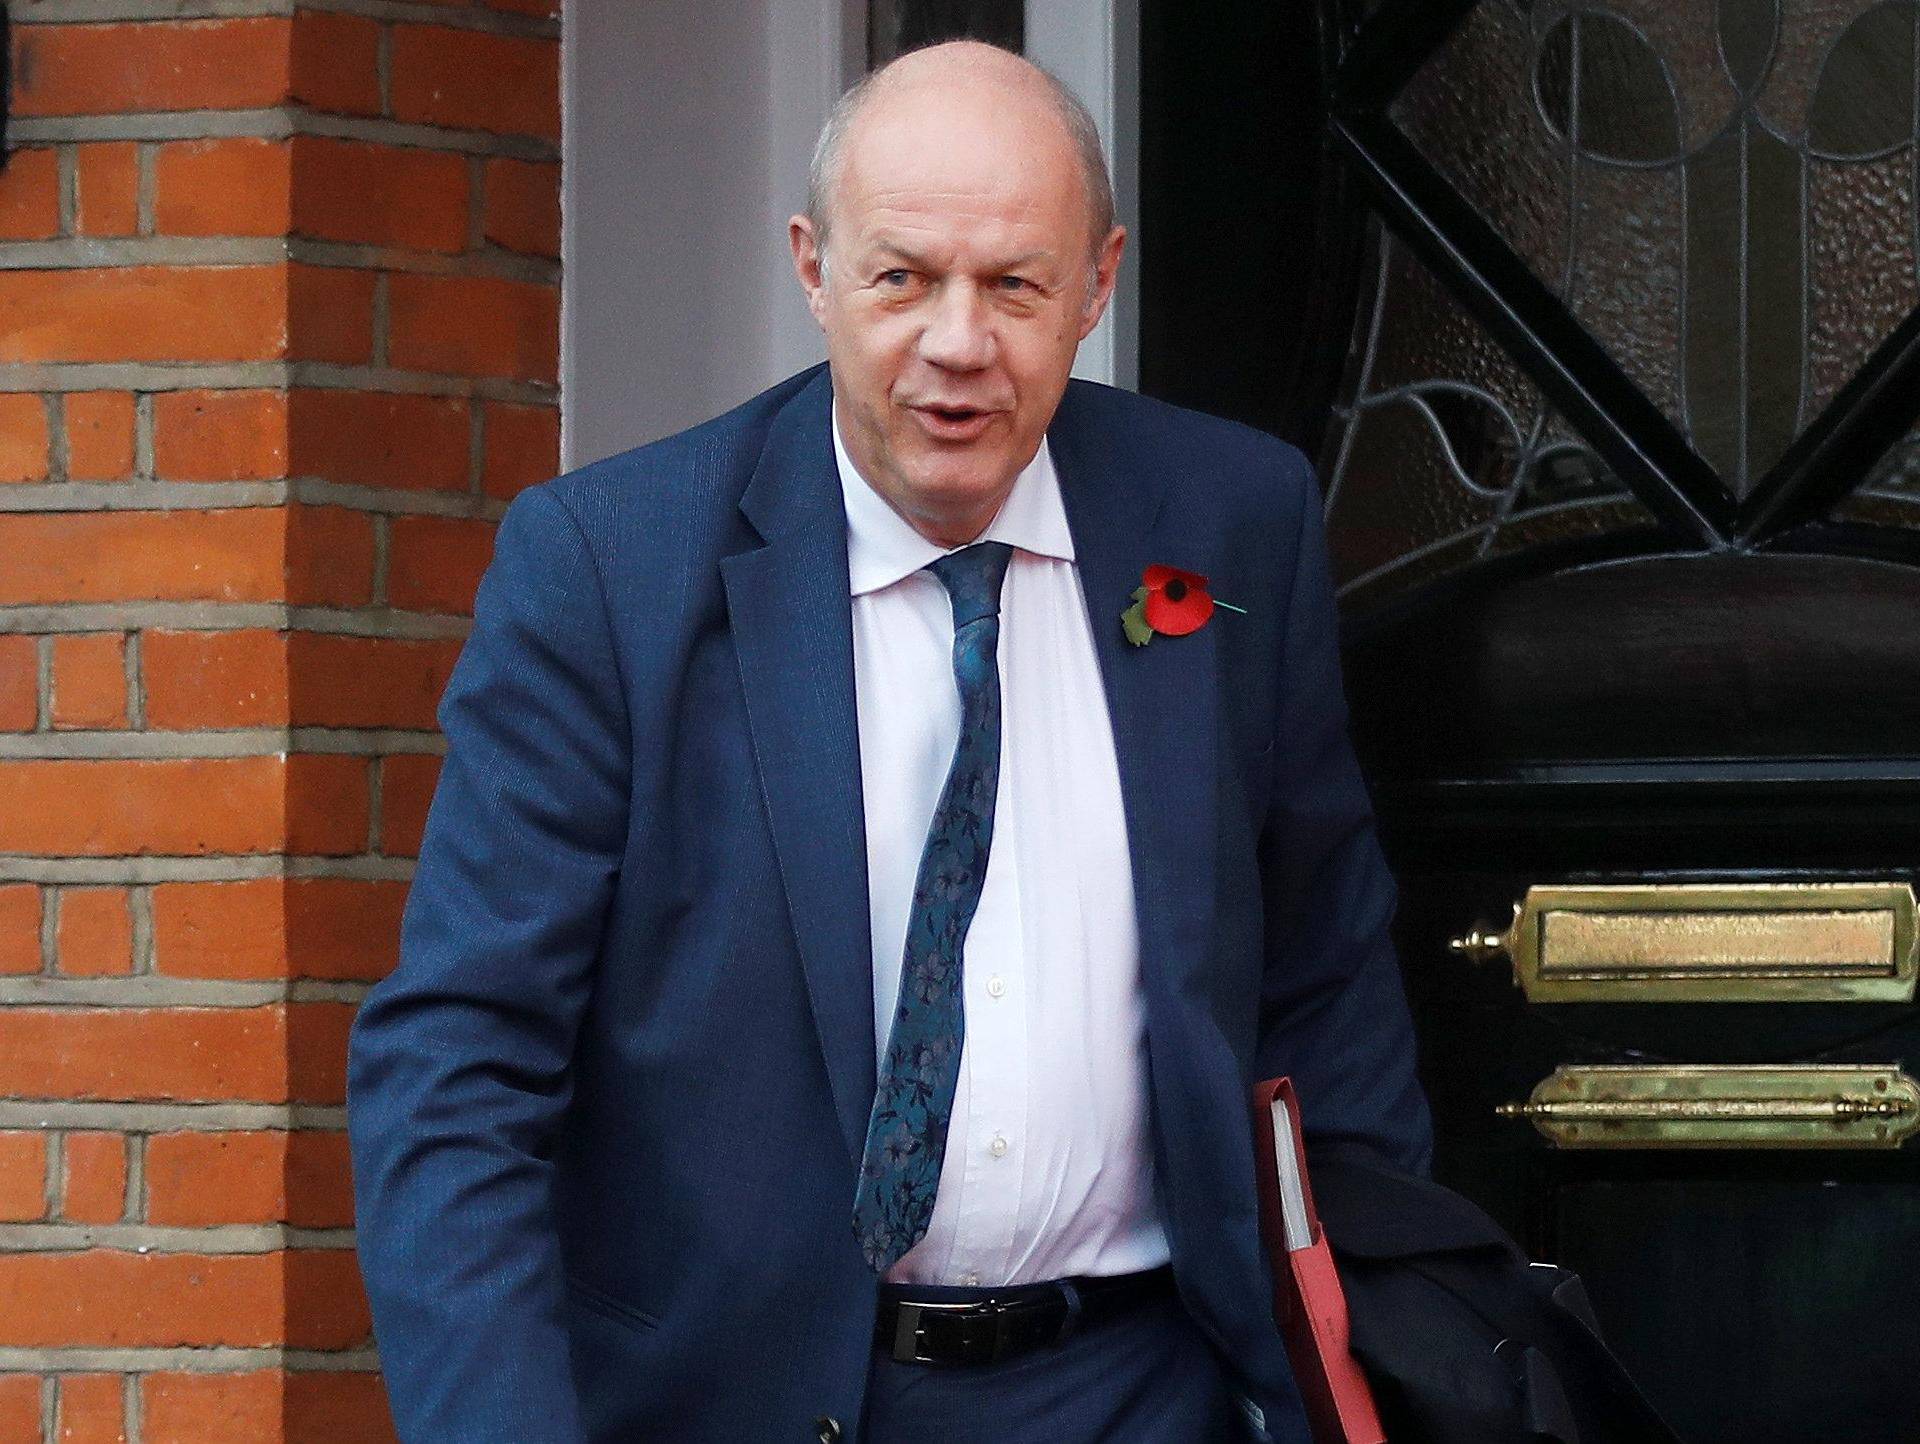 Damian Green, Britain's Prime Minister Theresa May's deputy, leaves his home in London